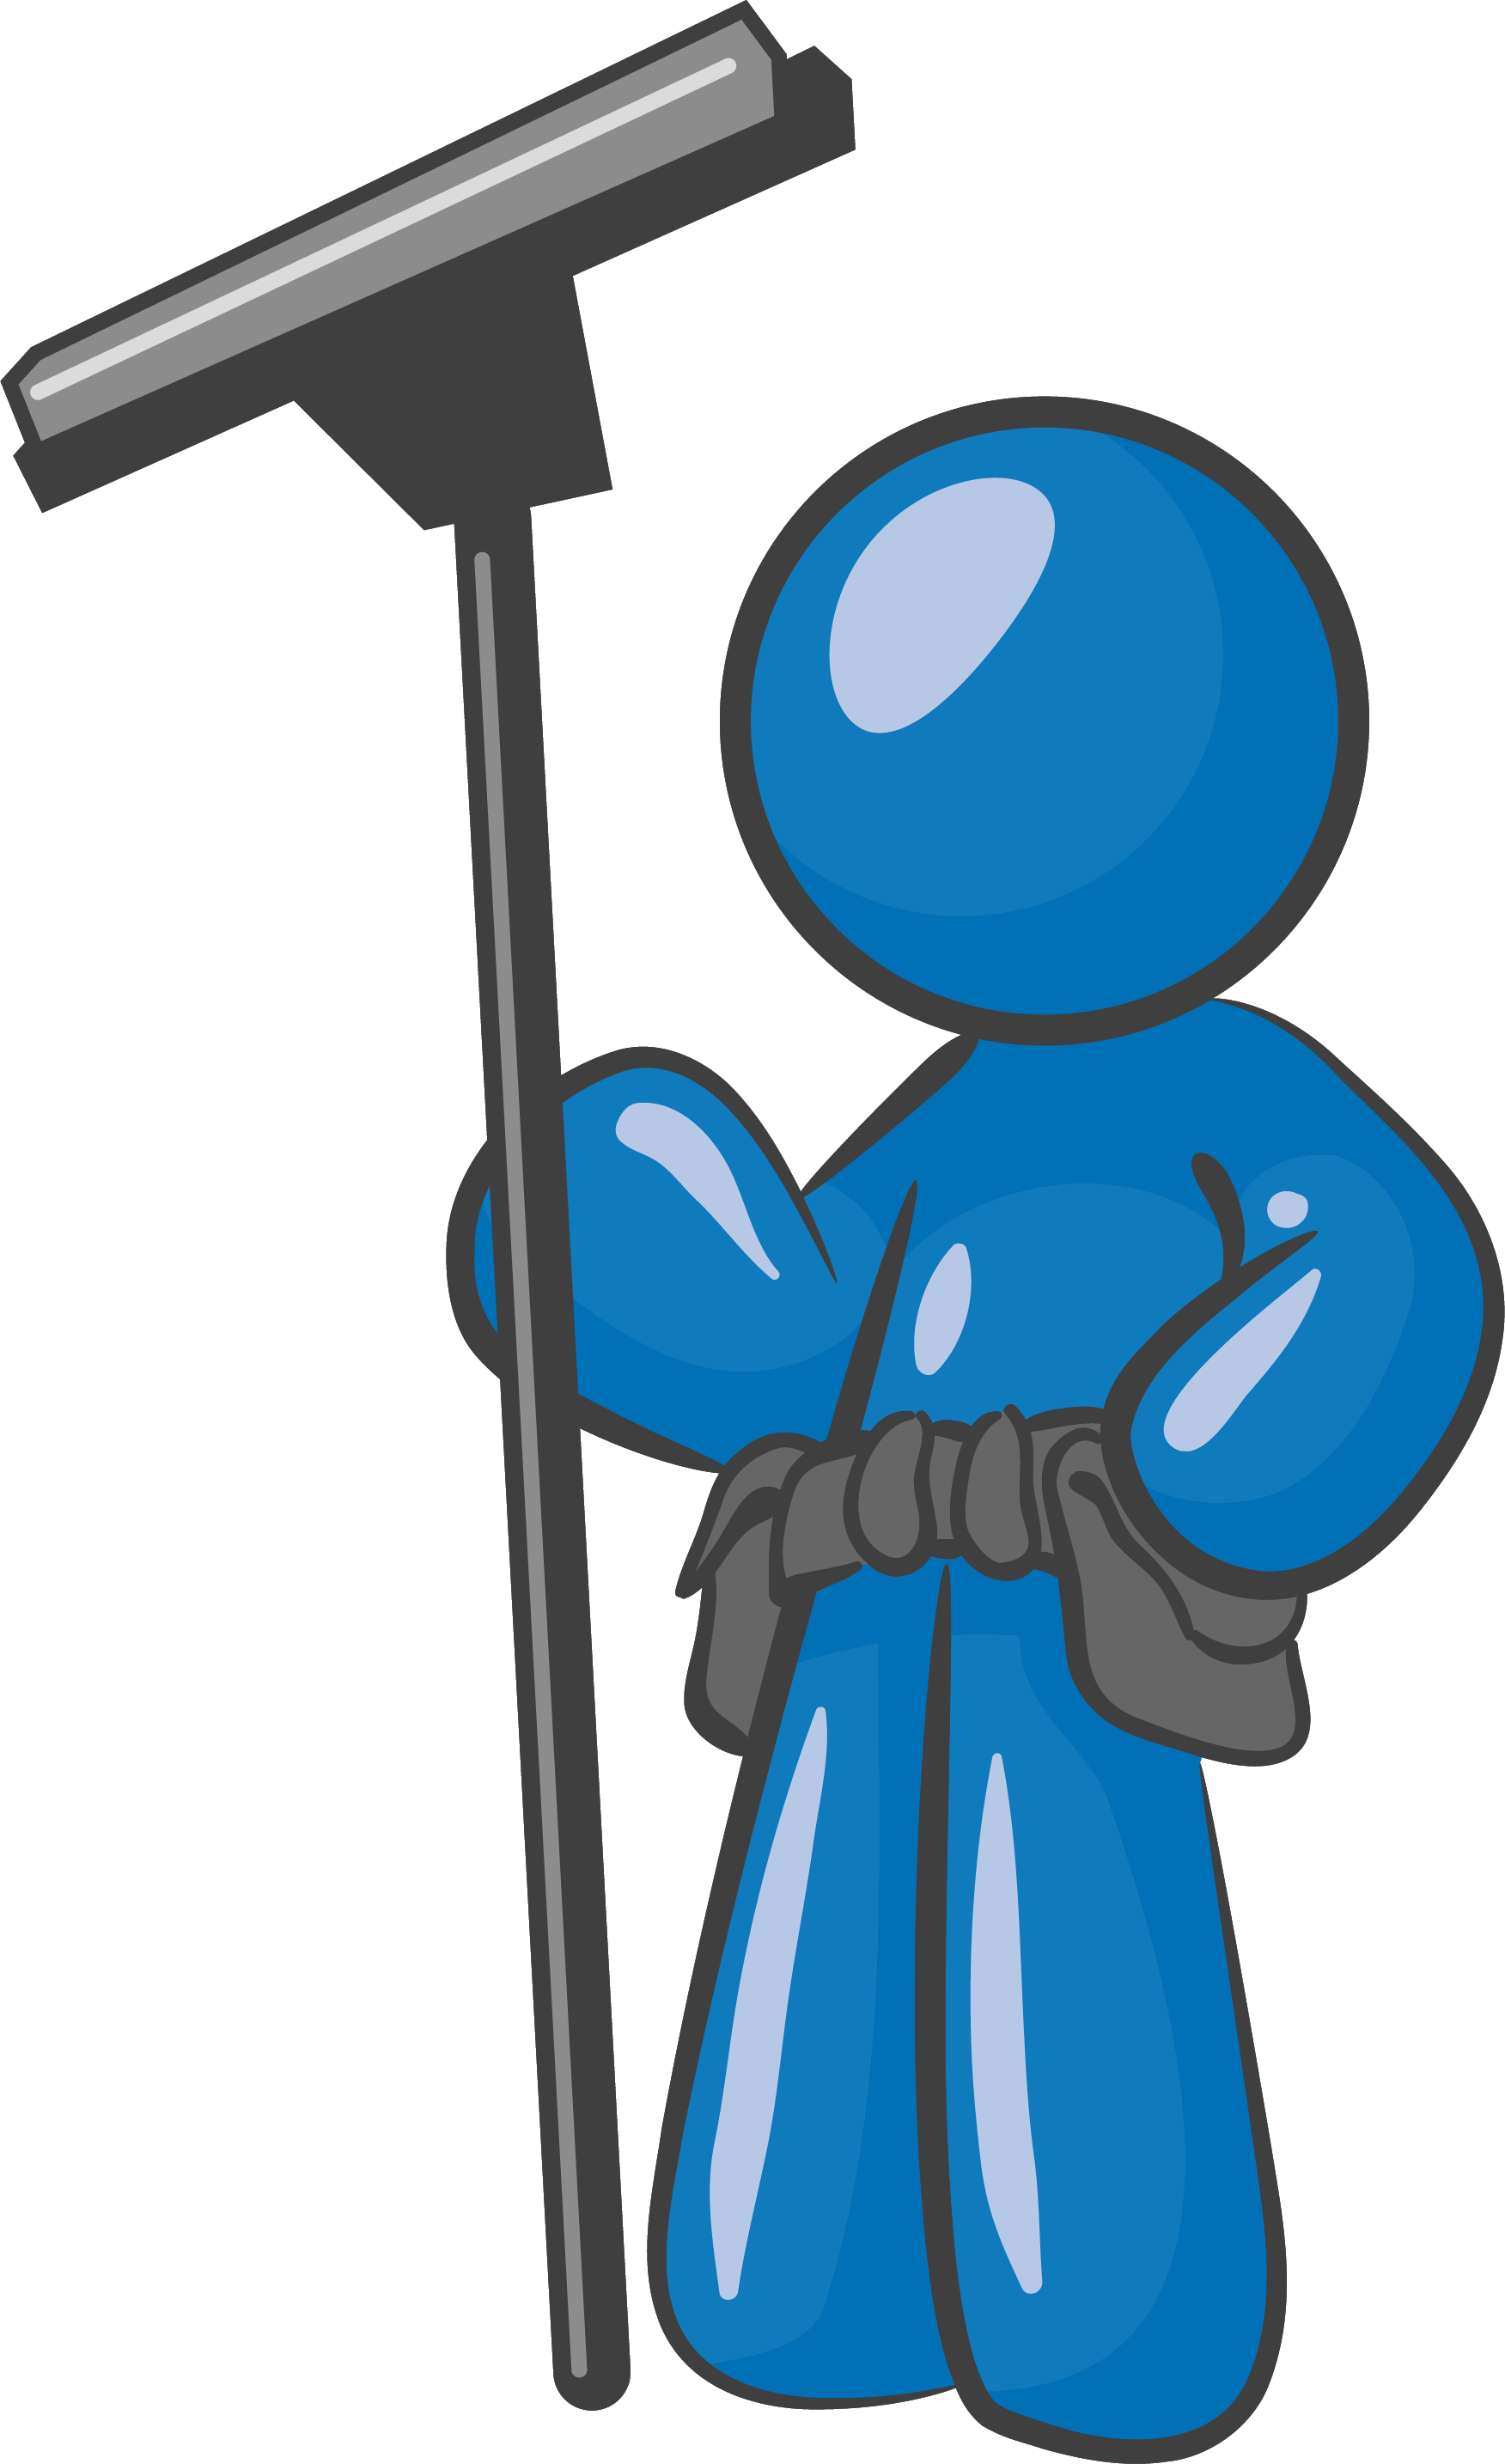 Contact shine through free. Clean clipart window washer